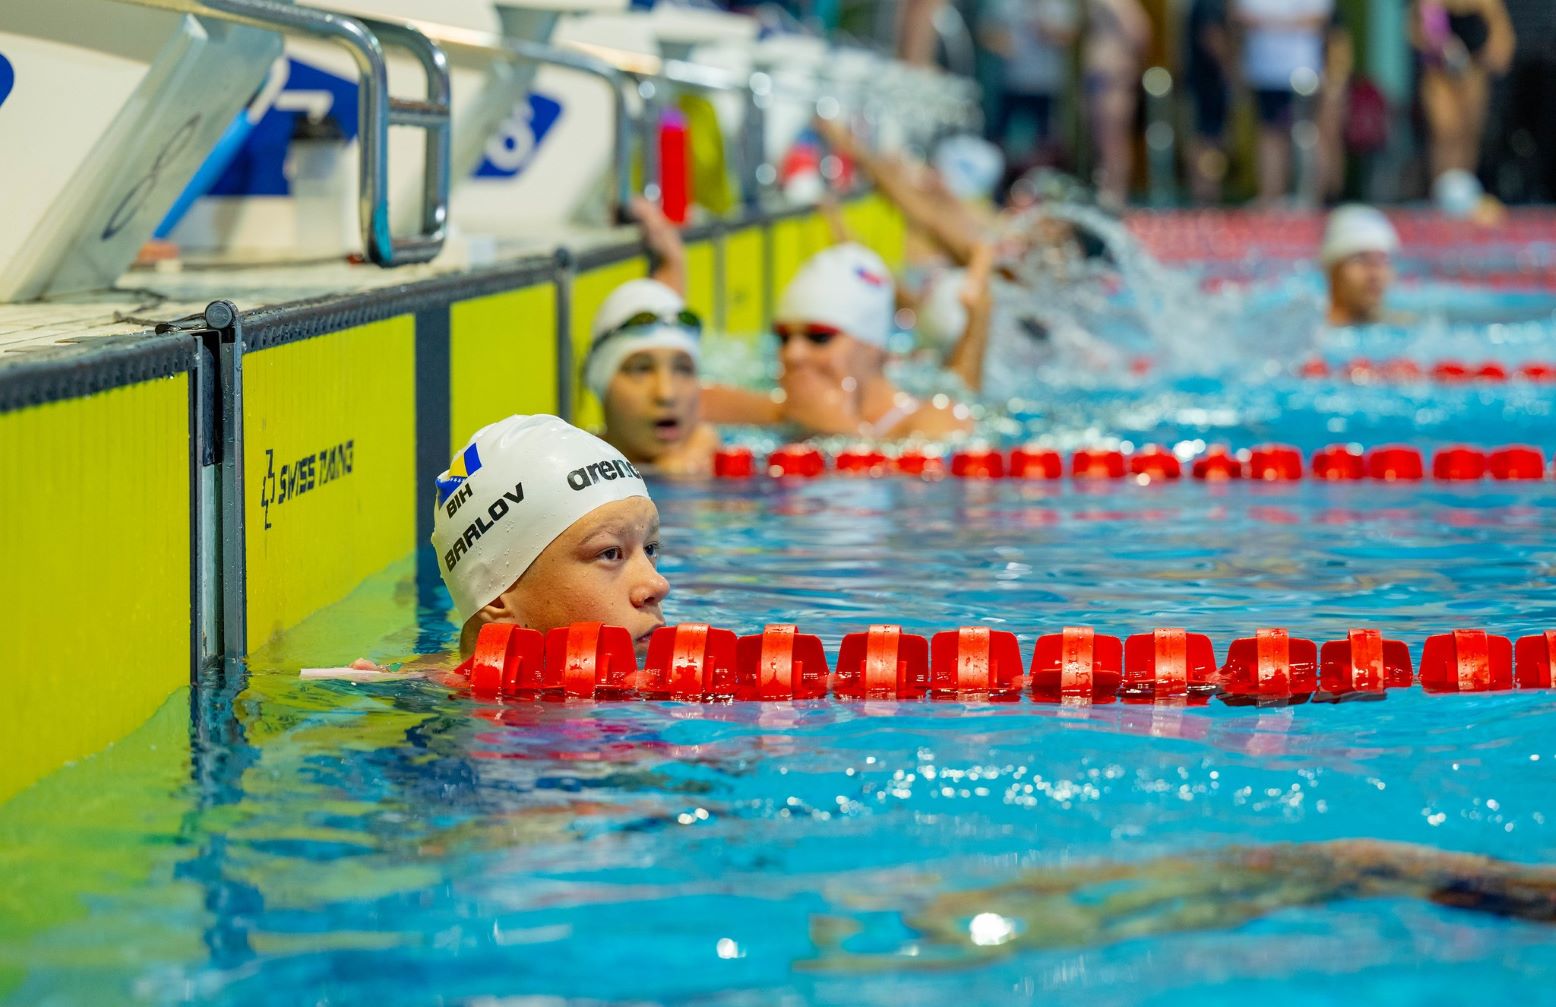 A male swimmer in a swimming pool lane with other swimmers in the background